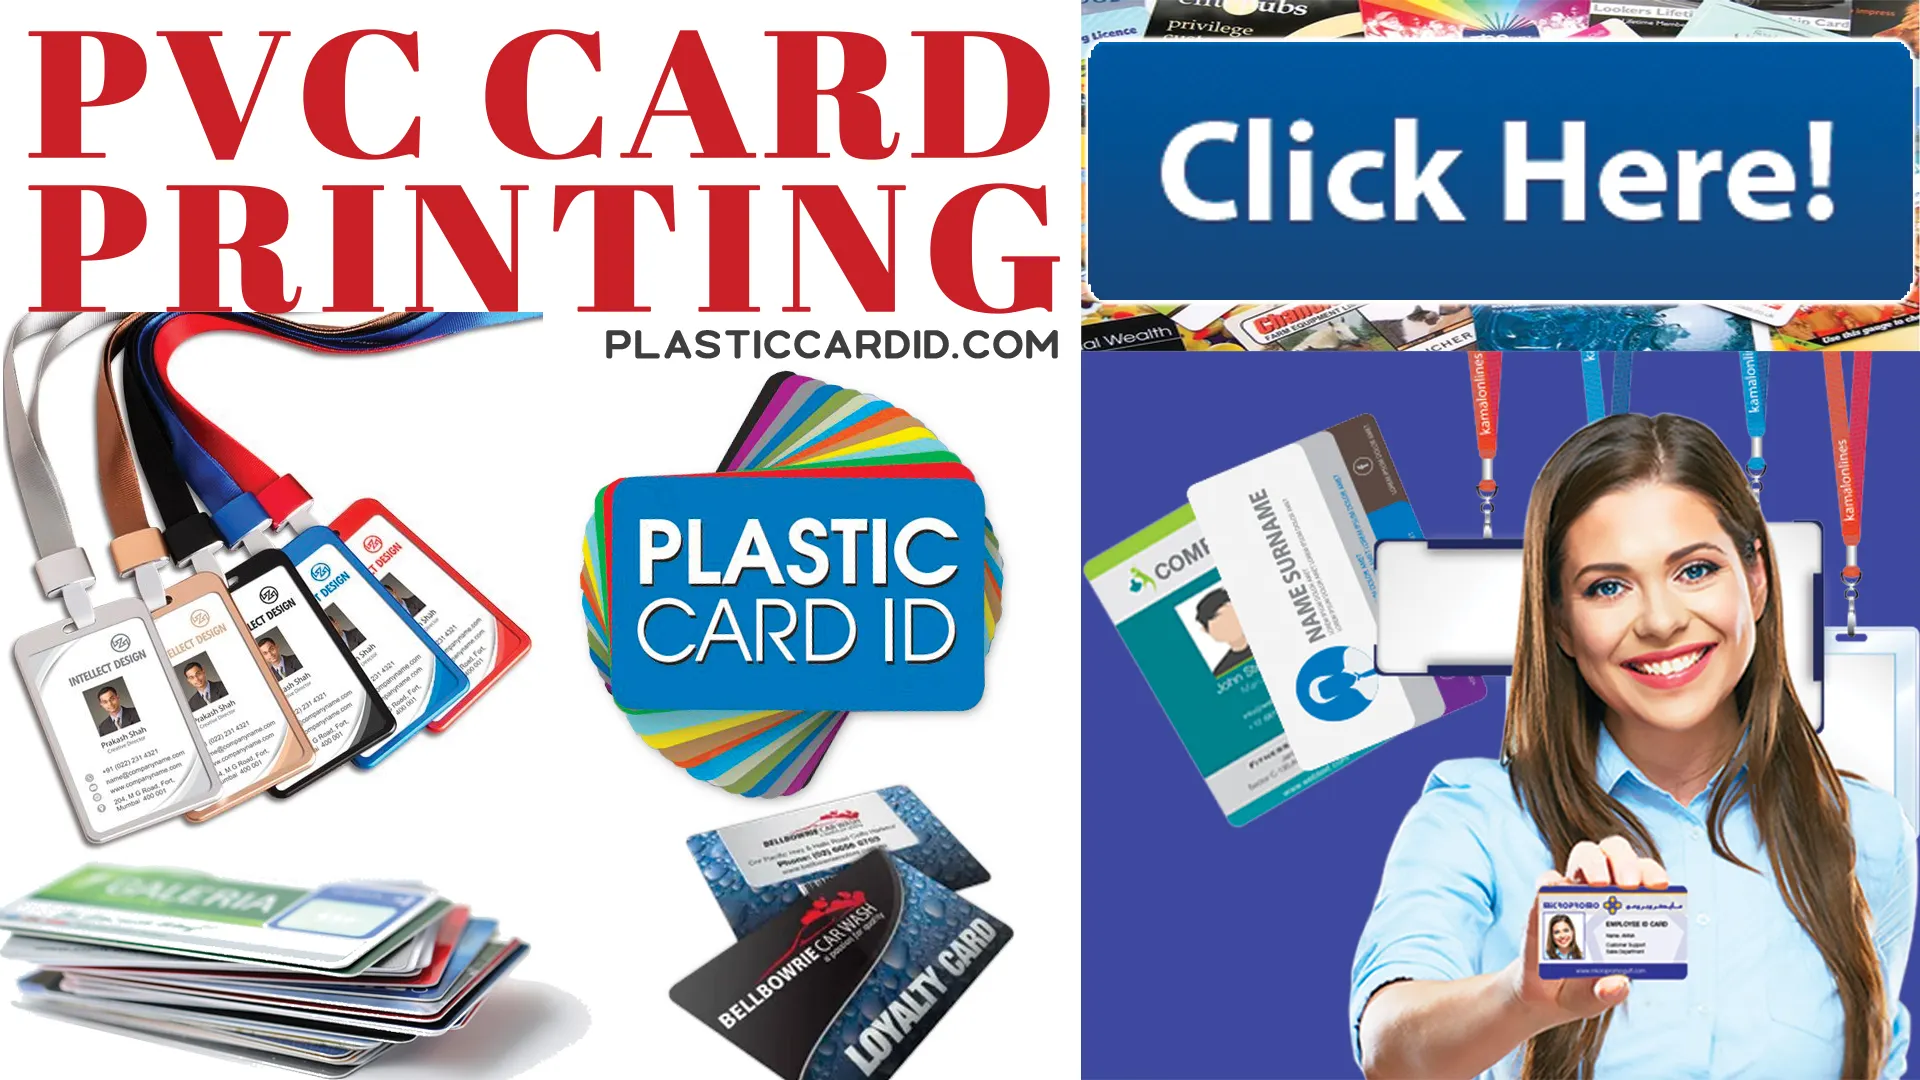 Our Product Range: Cards for Every Need